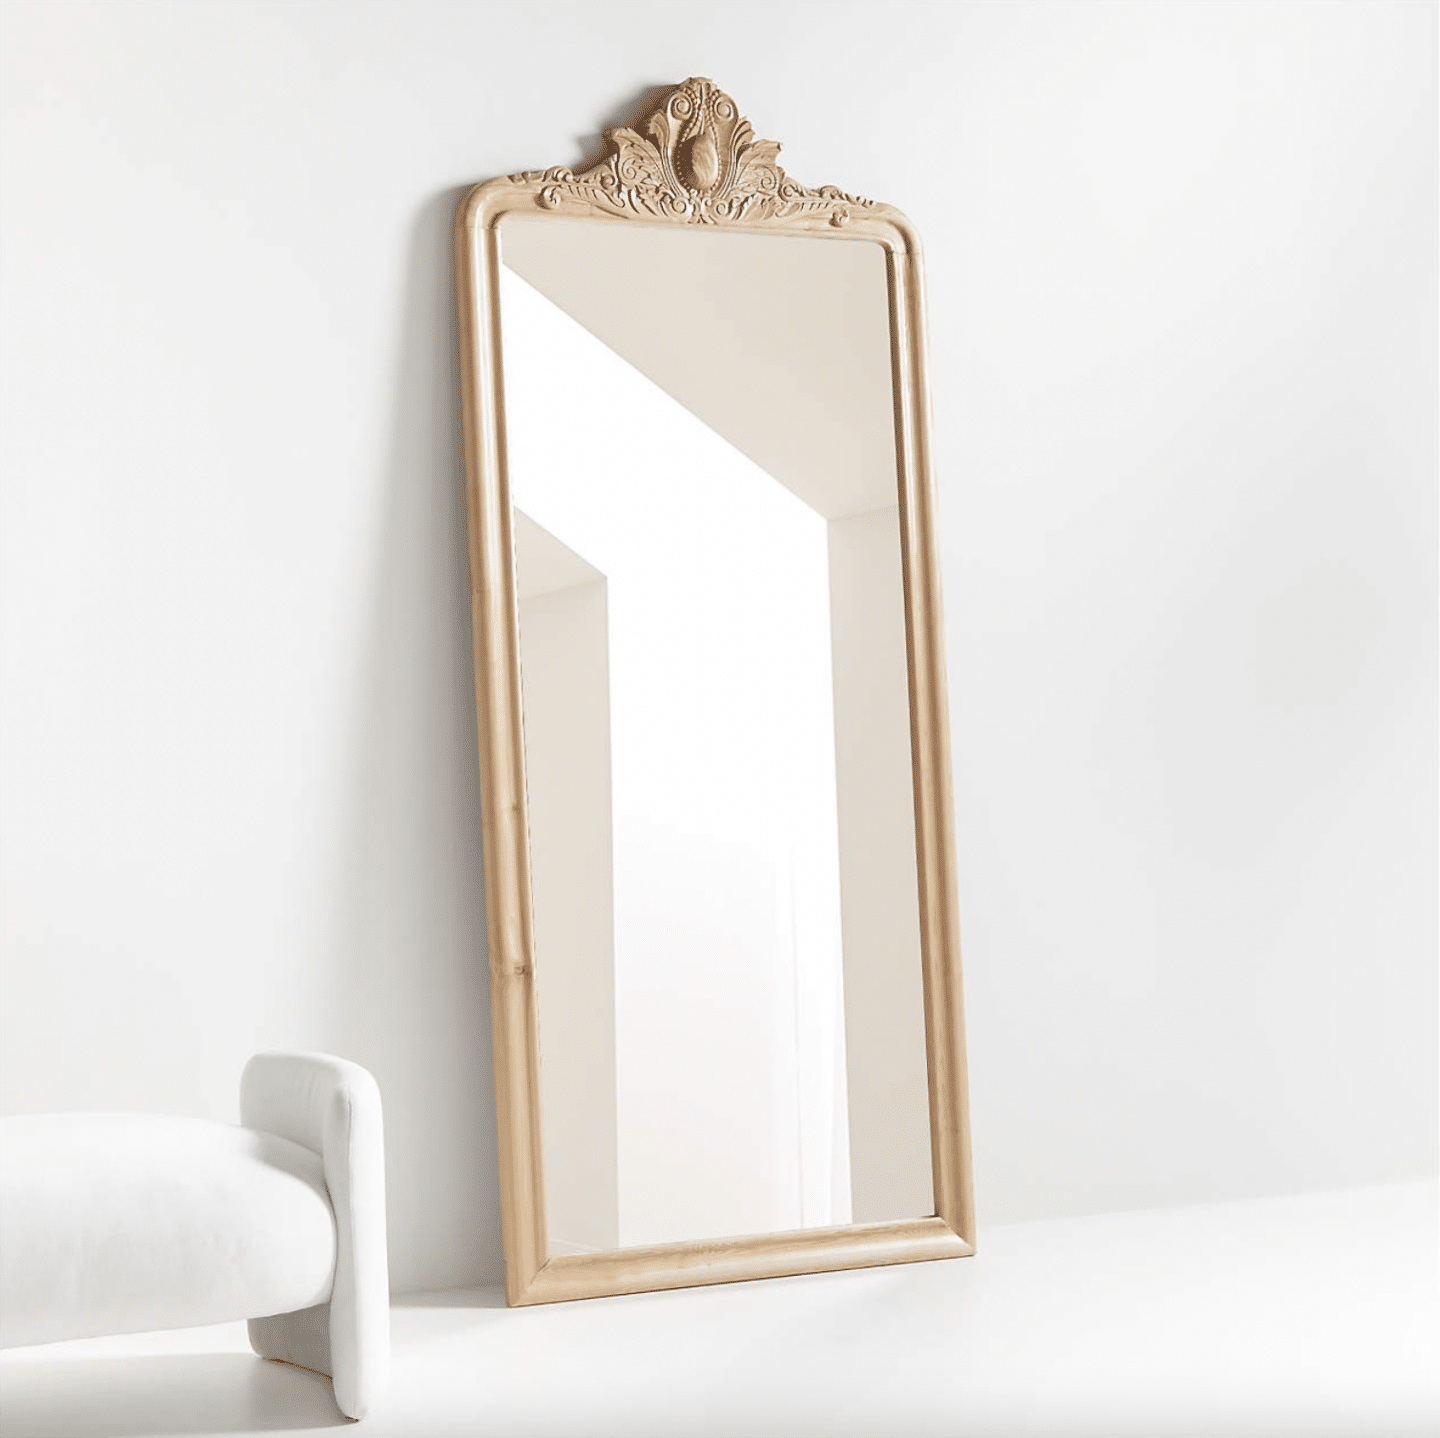 crate and barrel mirrors, by blogger what the fab